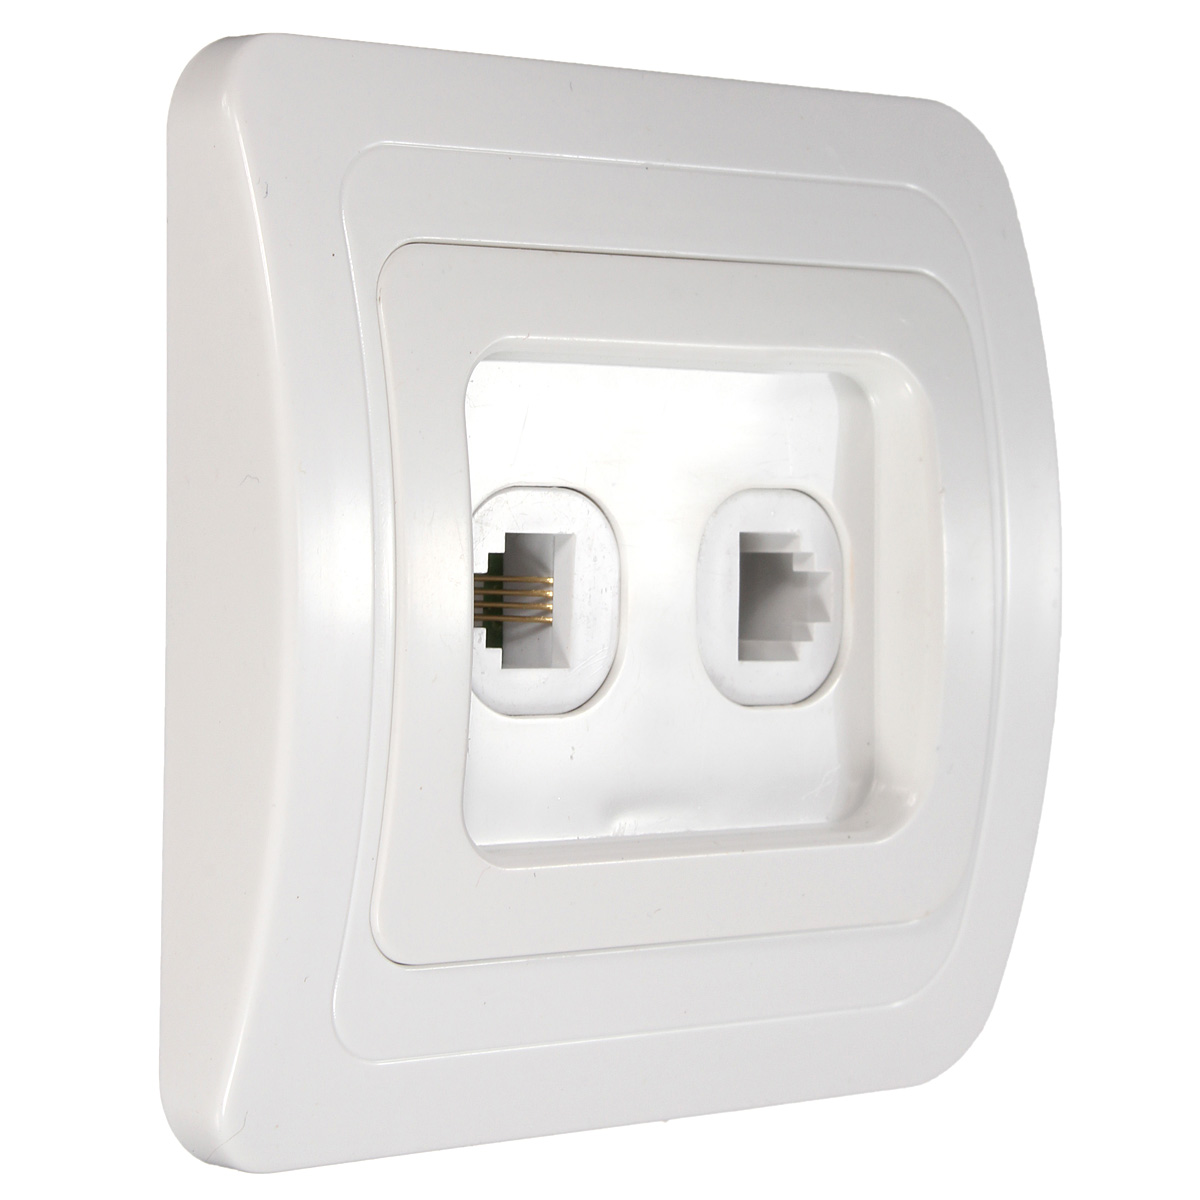 RJ11-Electric-Wall-Station-Socket-Telephone-Phone-Dual-Outlet-Panel-Face-Plate-Socket-Connector-1399685-5